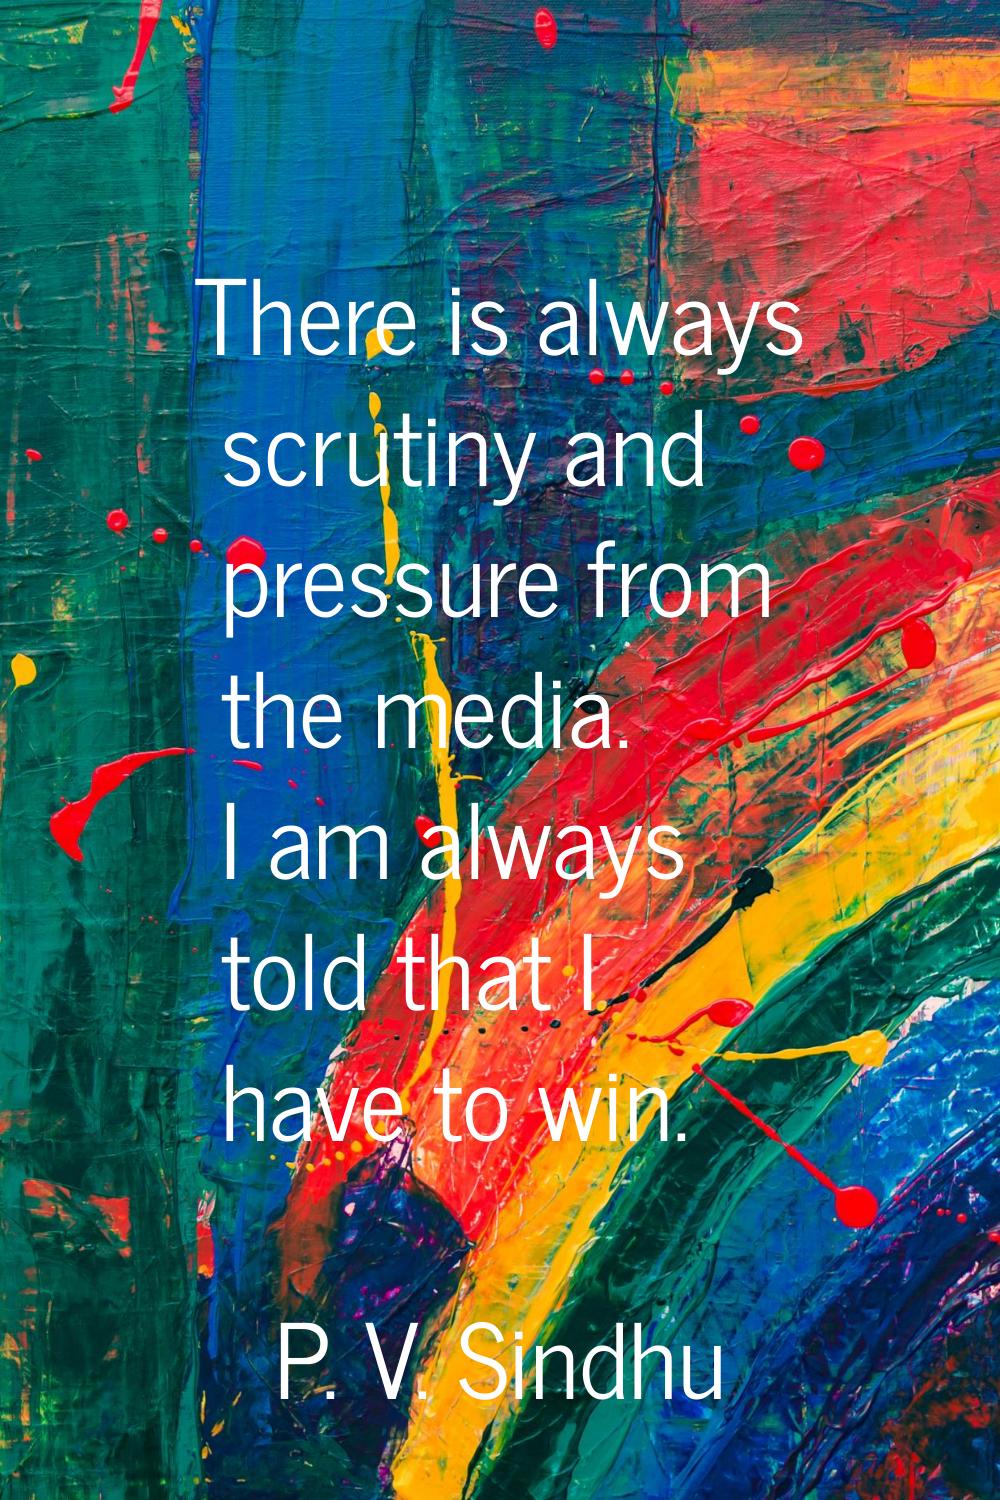 There is always scrutiny and pressure from the media. I am always told that I have to win.